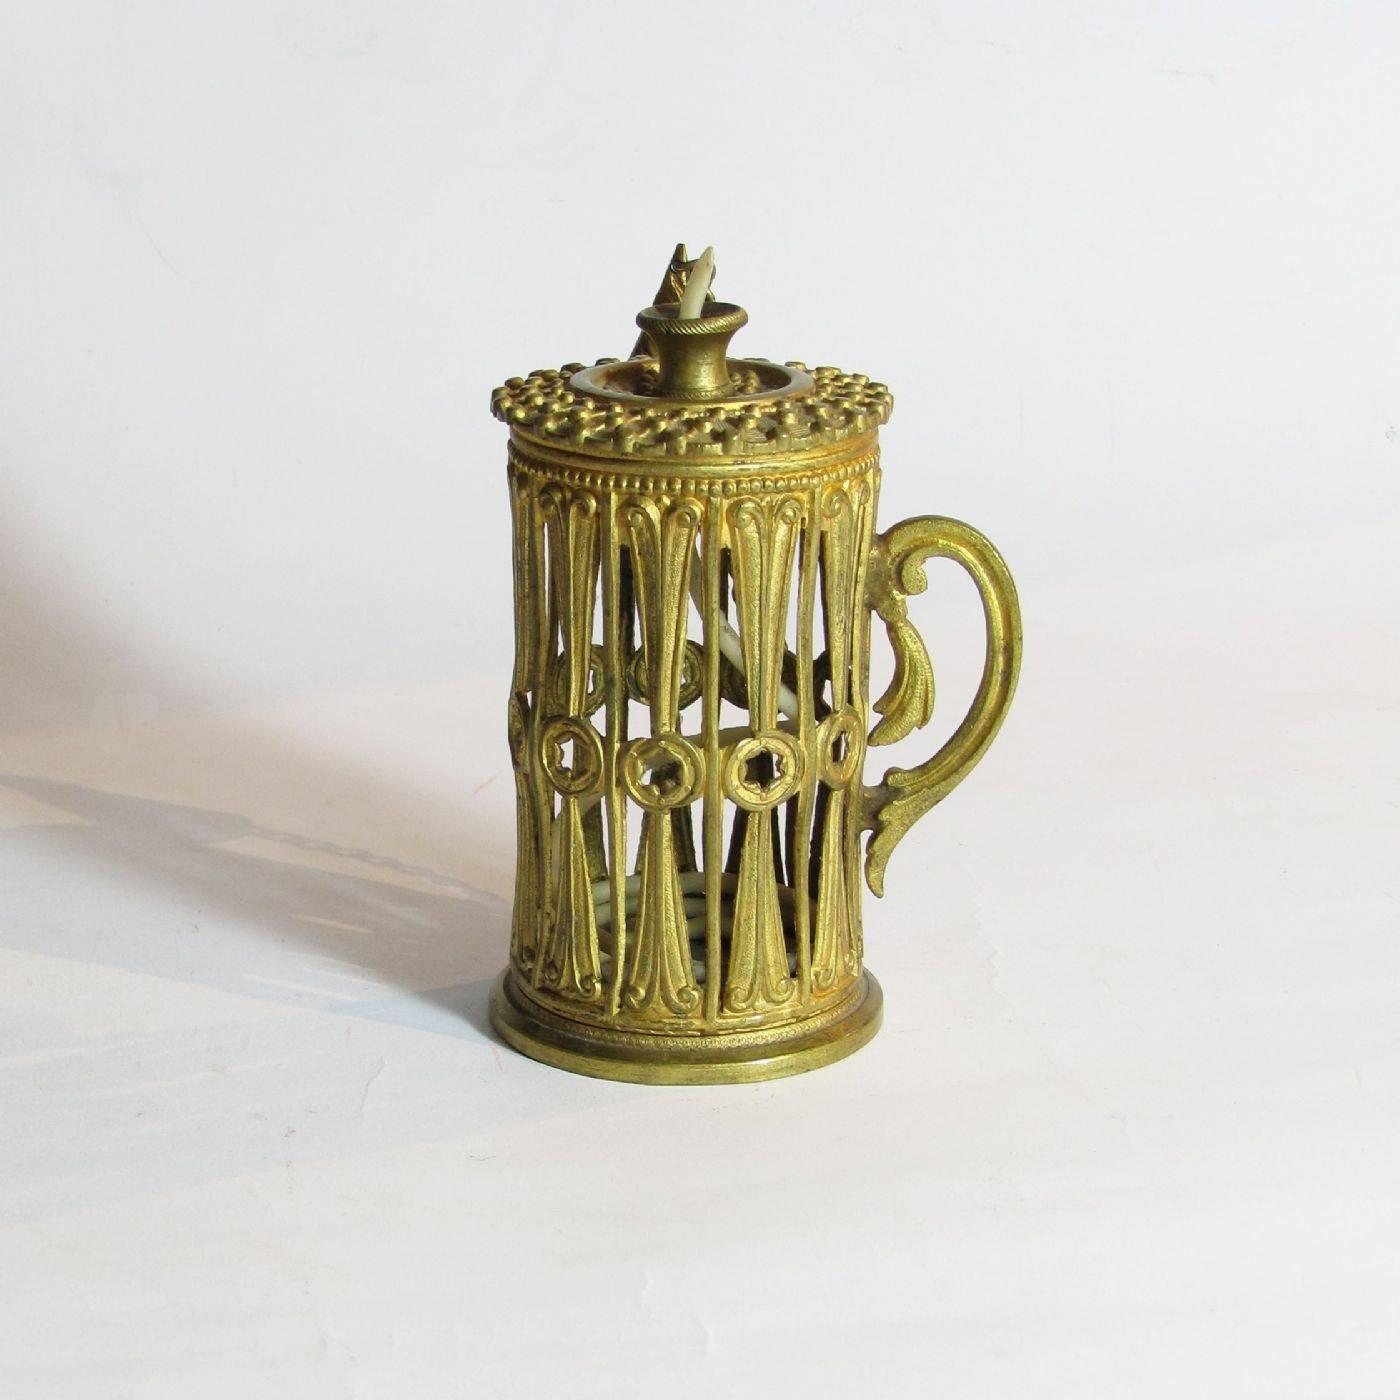 A small and elegant wax jack or wax tape holder in gilt bronze with antique beeswax coated wick.
This desk or writer's candleholder is a superb piece for the collector.
Europe, 19th century.


     